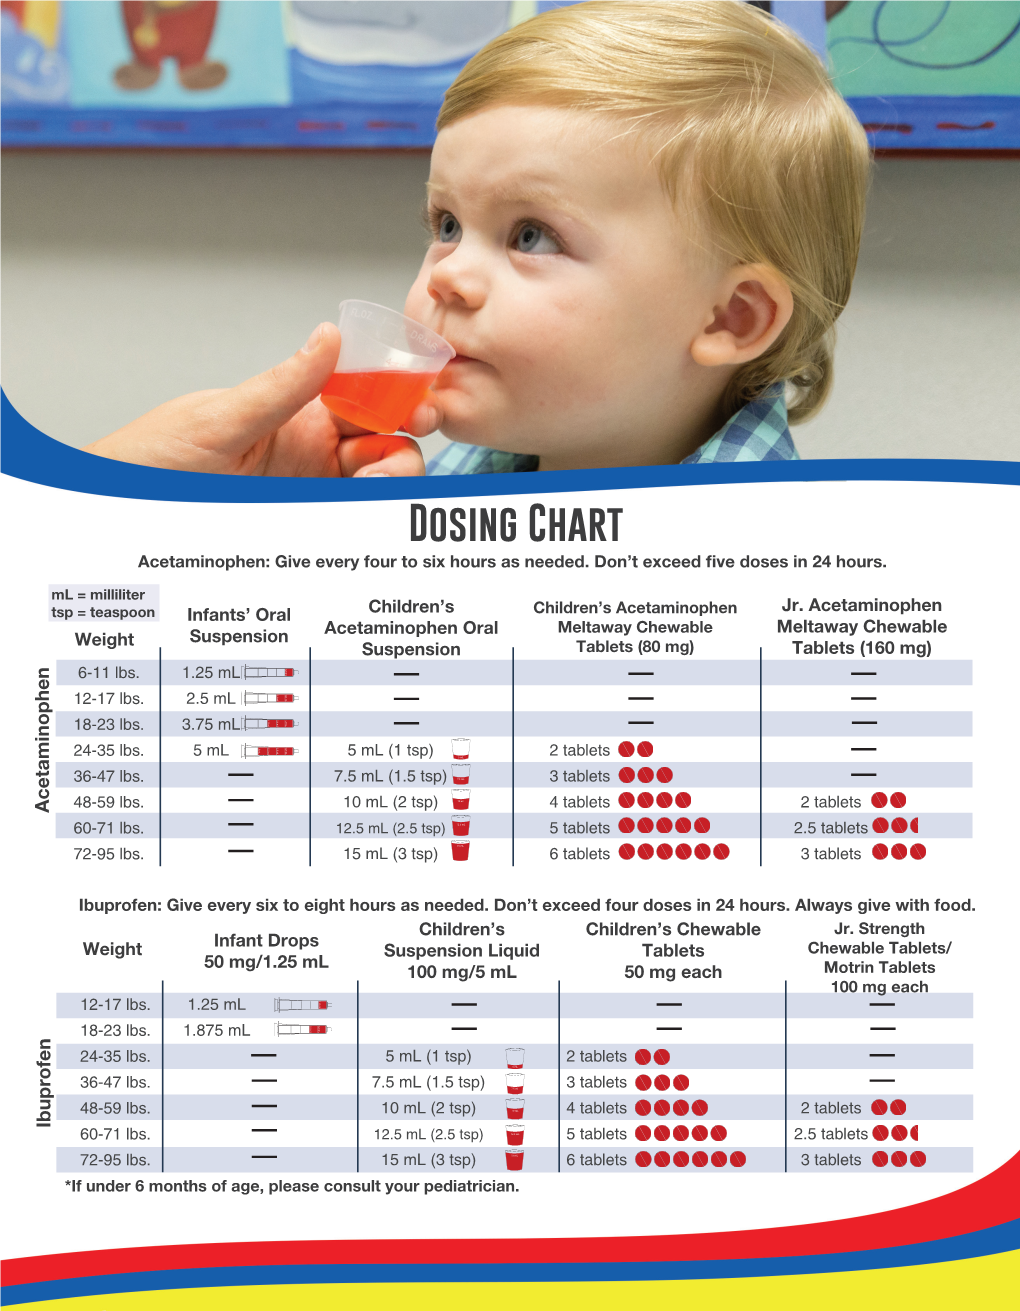 Dosing Chart Acetaminophen: Give Every Four to Six Hours As Needed